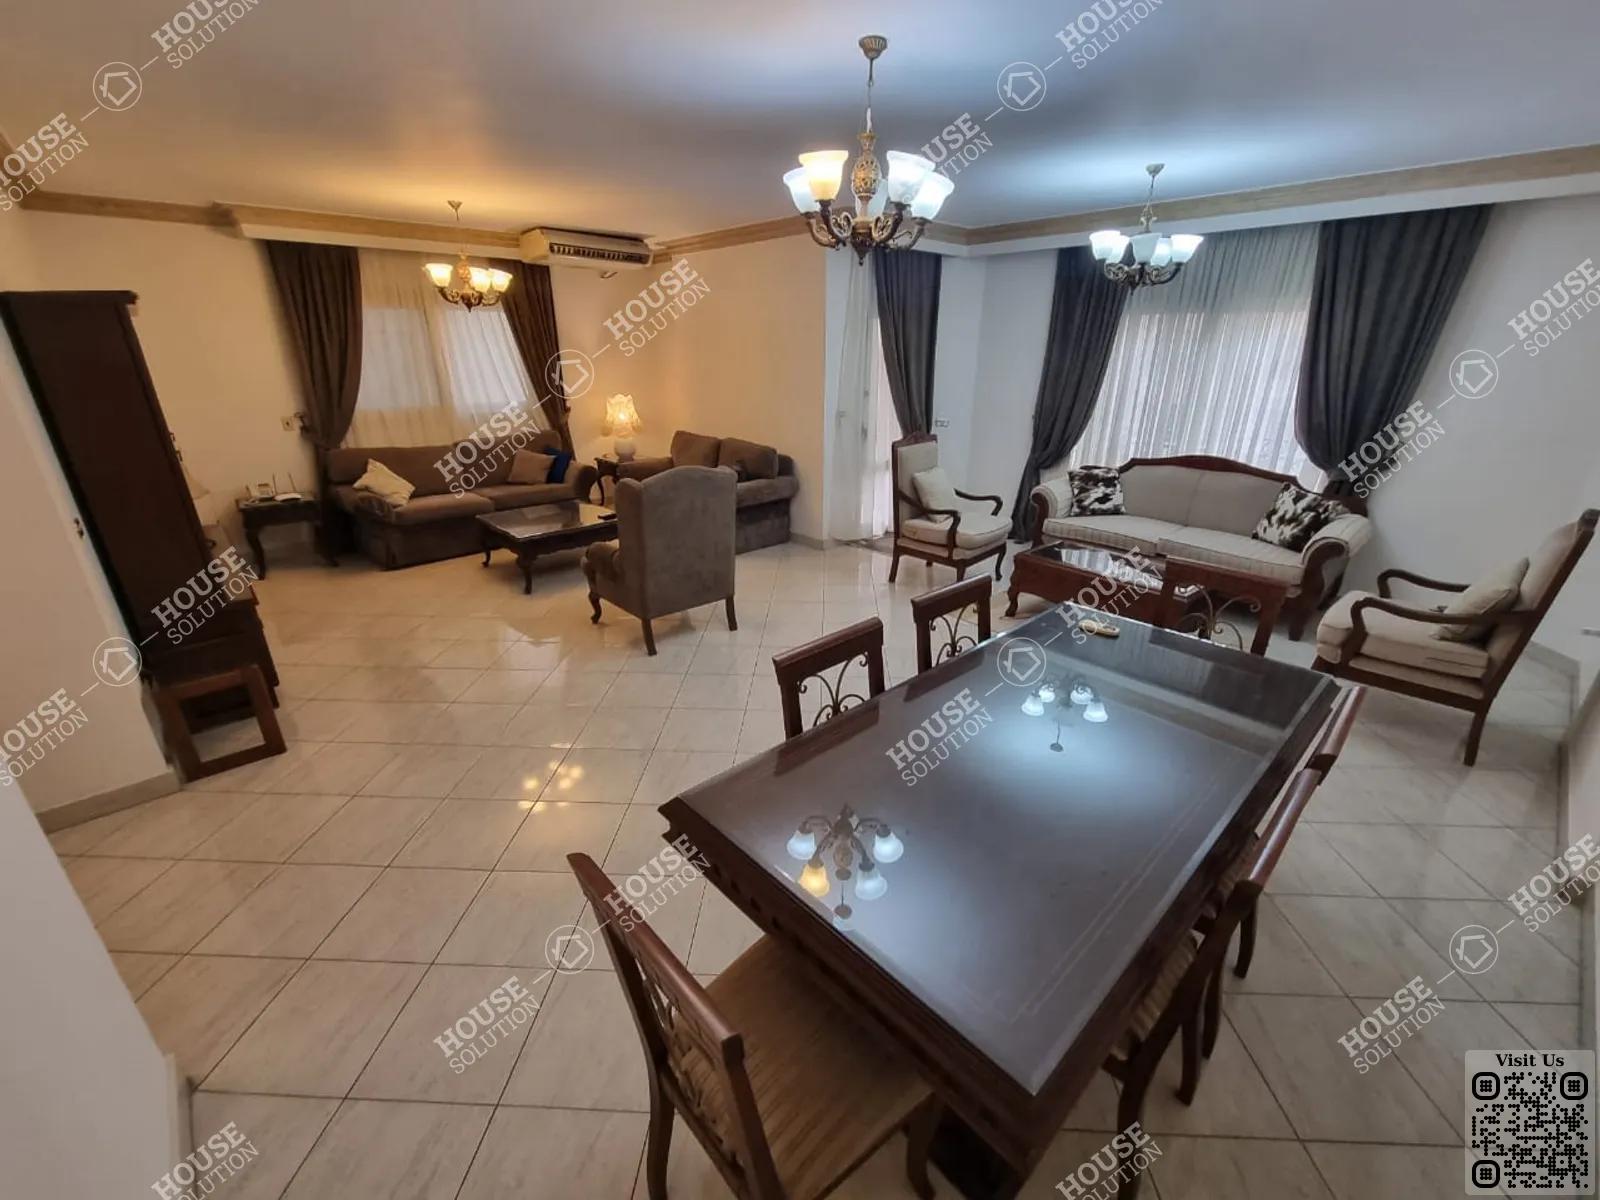 RECEPTION  @ Apartments For Rent In Maadi Maadi Degla Area: 180 m² consists of 3 Bedrooms 2 Bathrooms Furnished 5 stars #4833-0